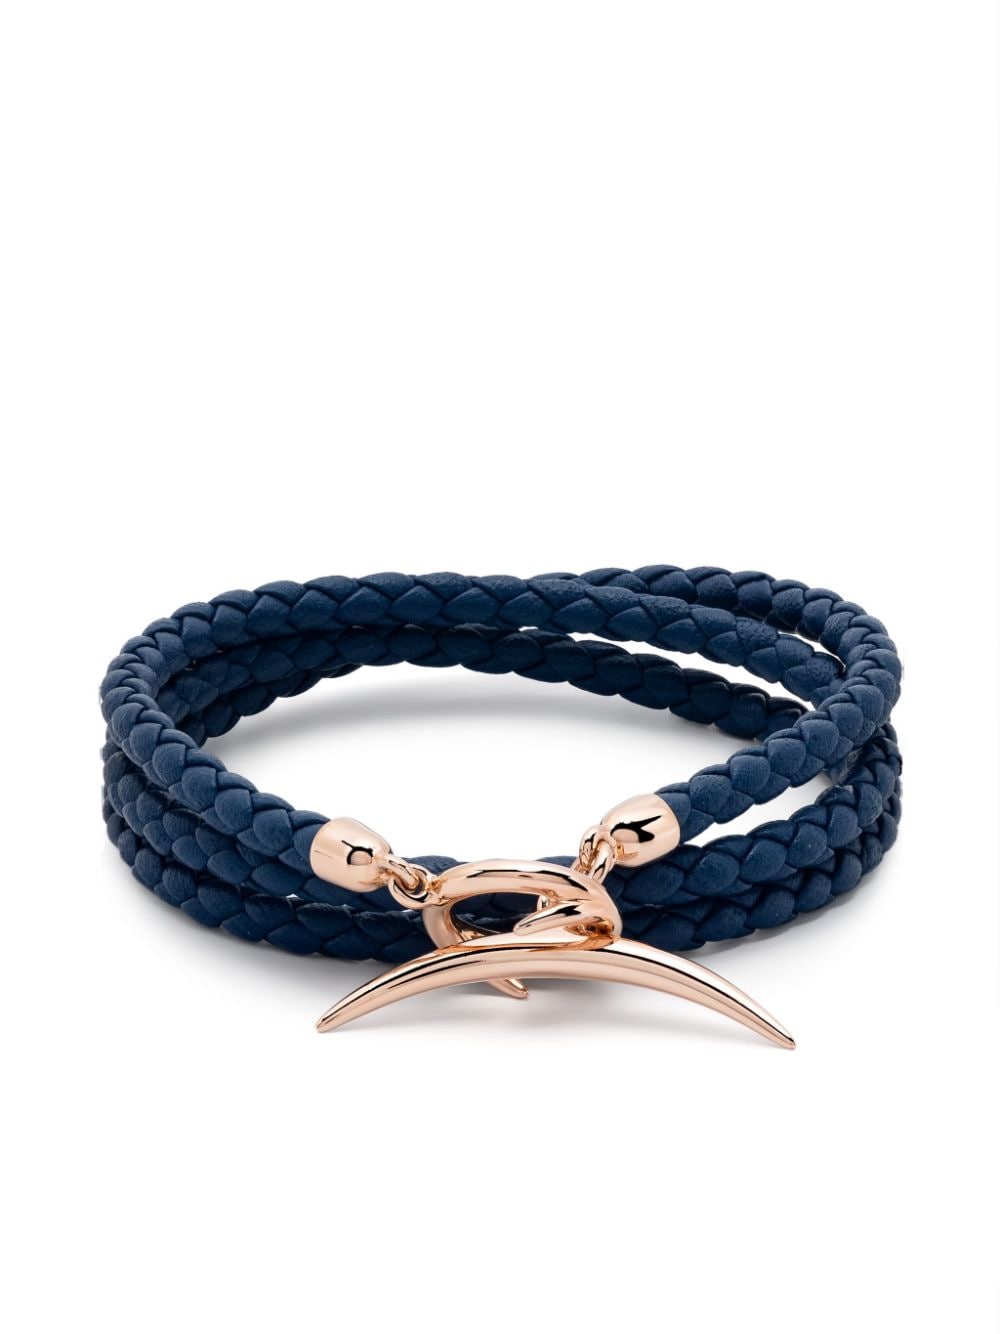 Shaun Leane rose gold vermeil and leather Quill bracelet - Pink von Shaun Leane